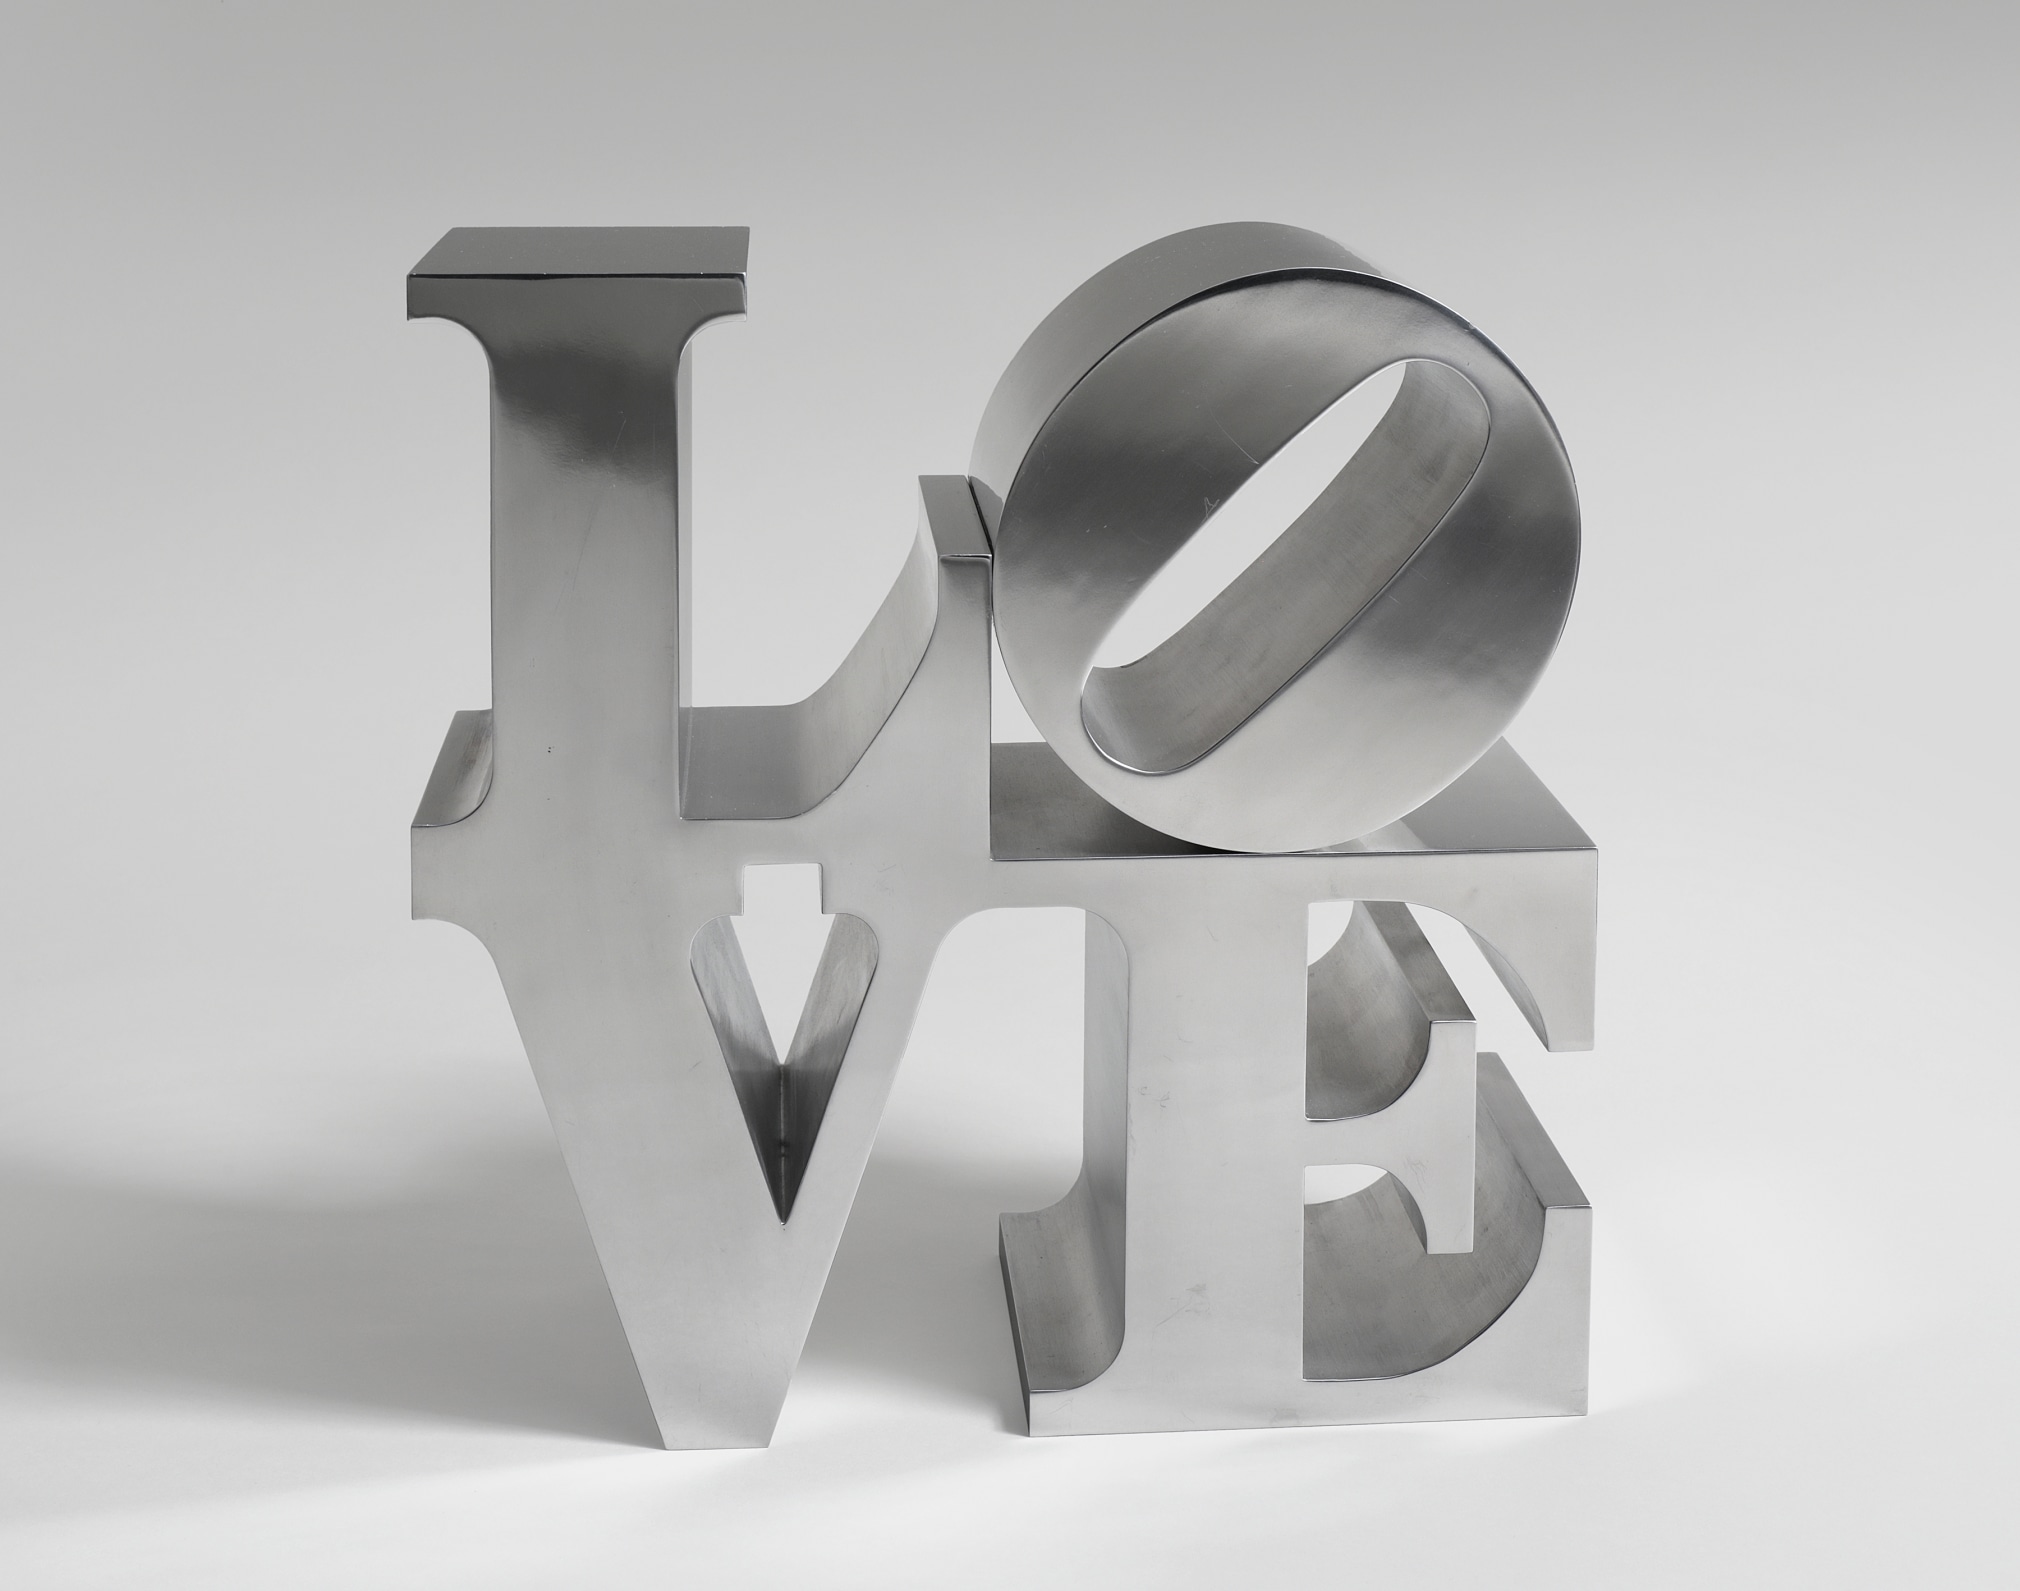 A 12 by 12 by 6 inch hand-cut and mirror-finished aluminum sculpture spelling love, consisting the letters L and a tilted letter O on top of the letters V and E.